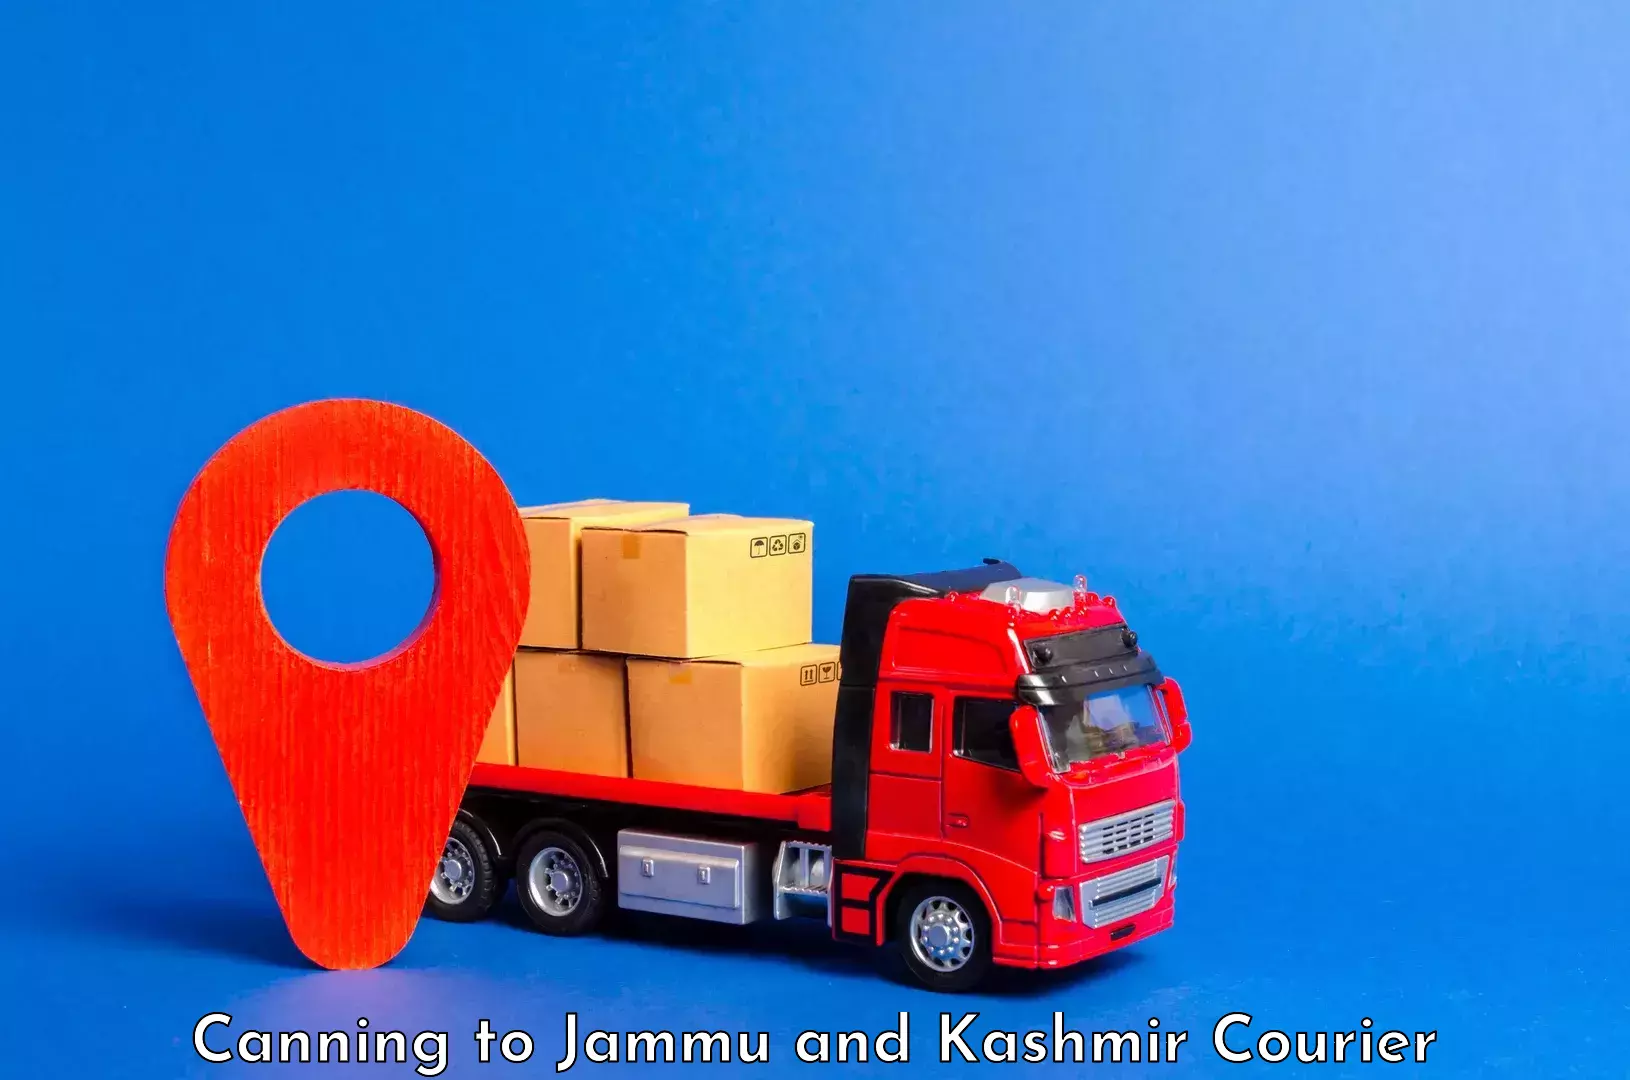 Hotel to Door baggage transport Canning to Jammu and Kashmir